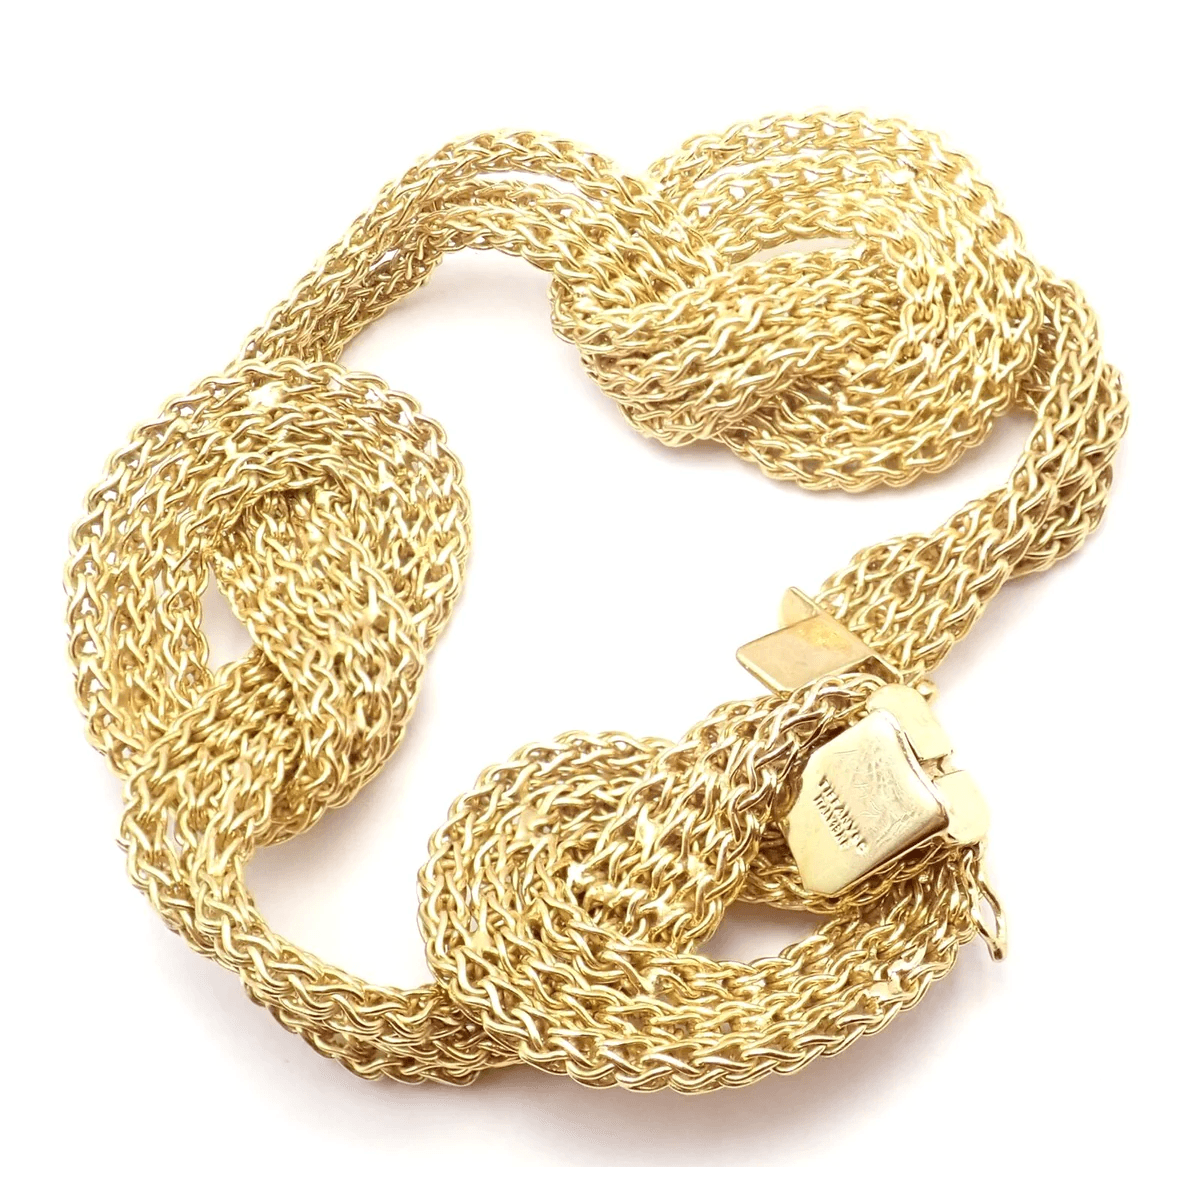 Tiffany & Co. Post-1980s 18KT Yellow Gold Woven Knot Bracelet front